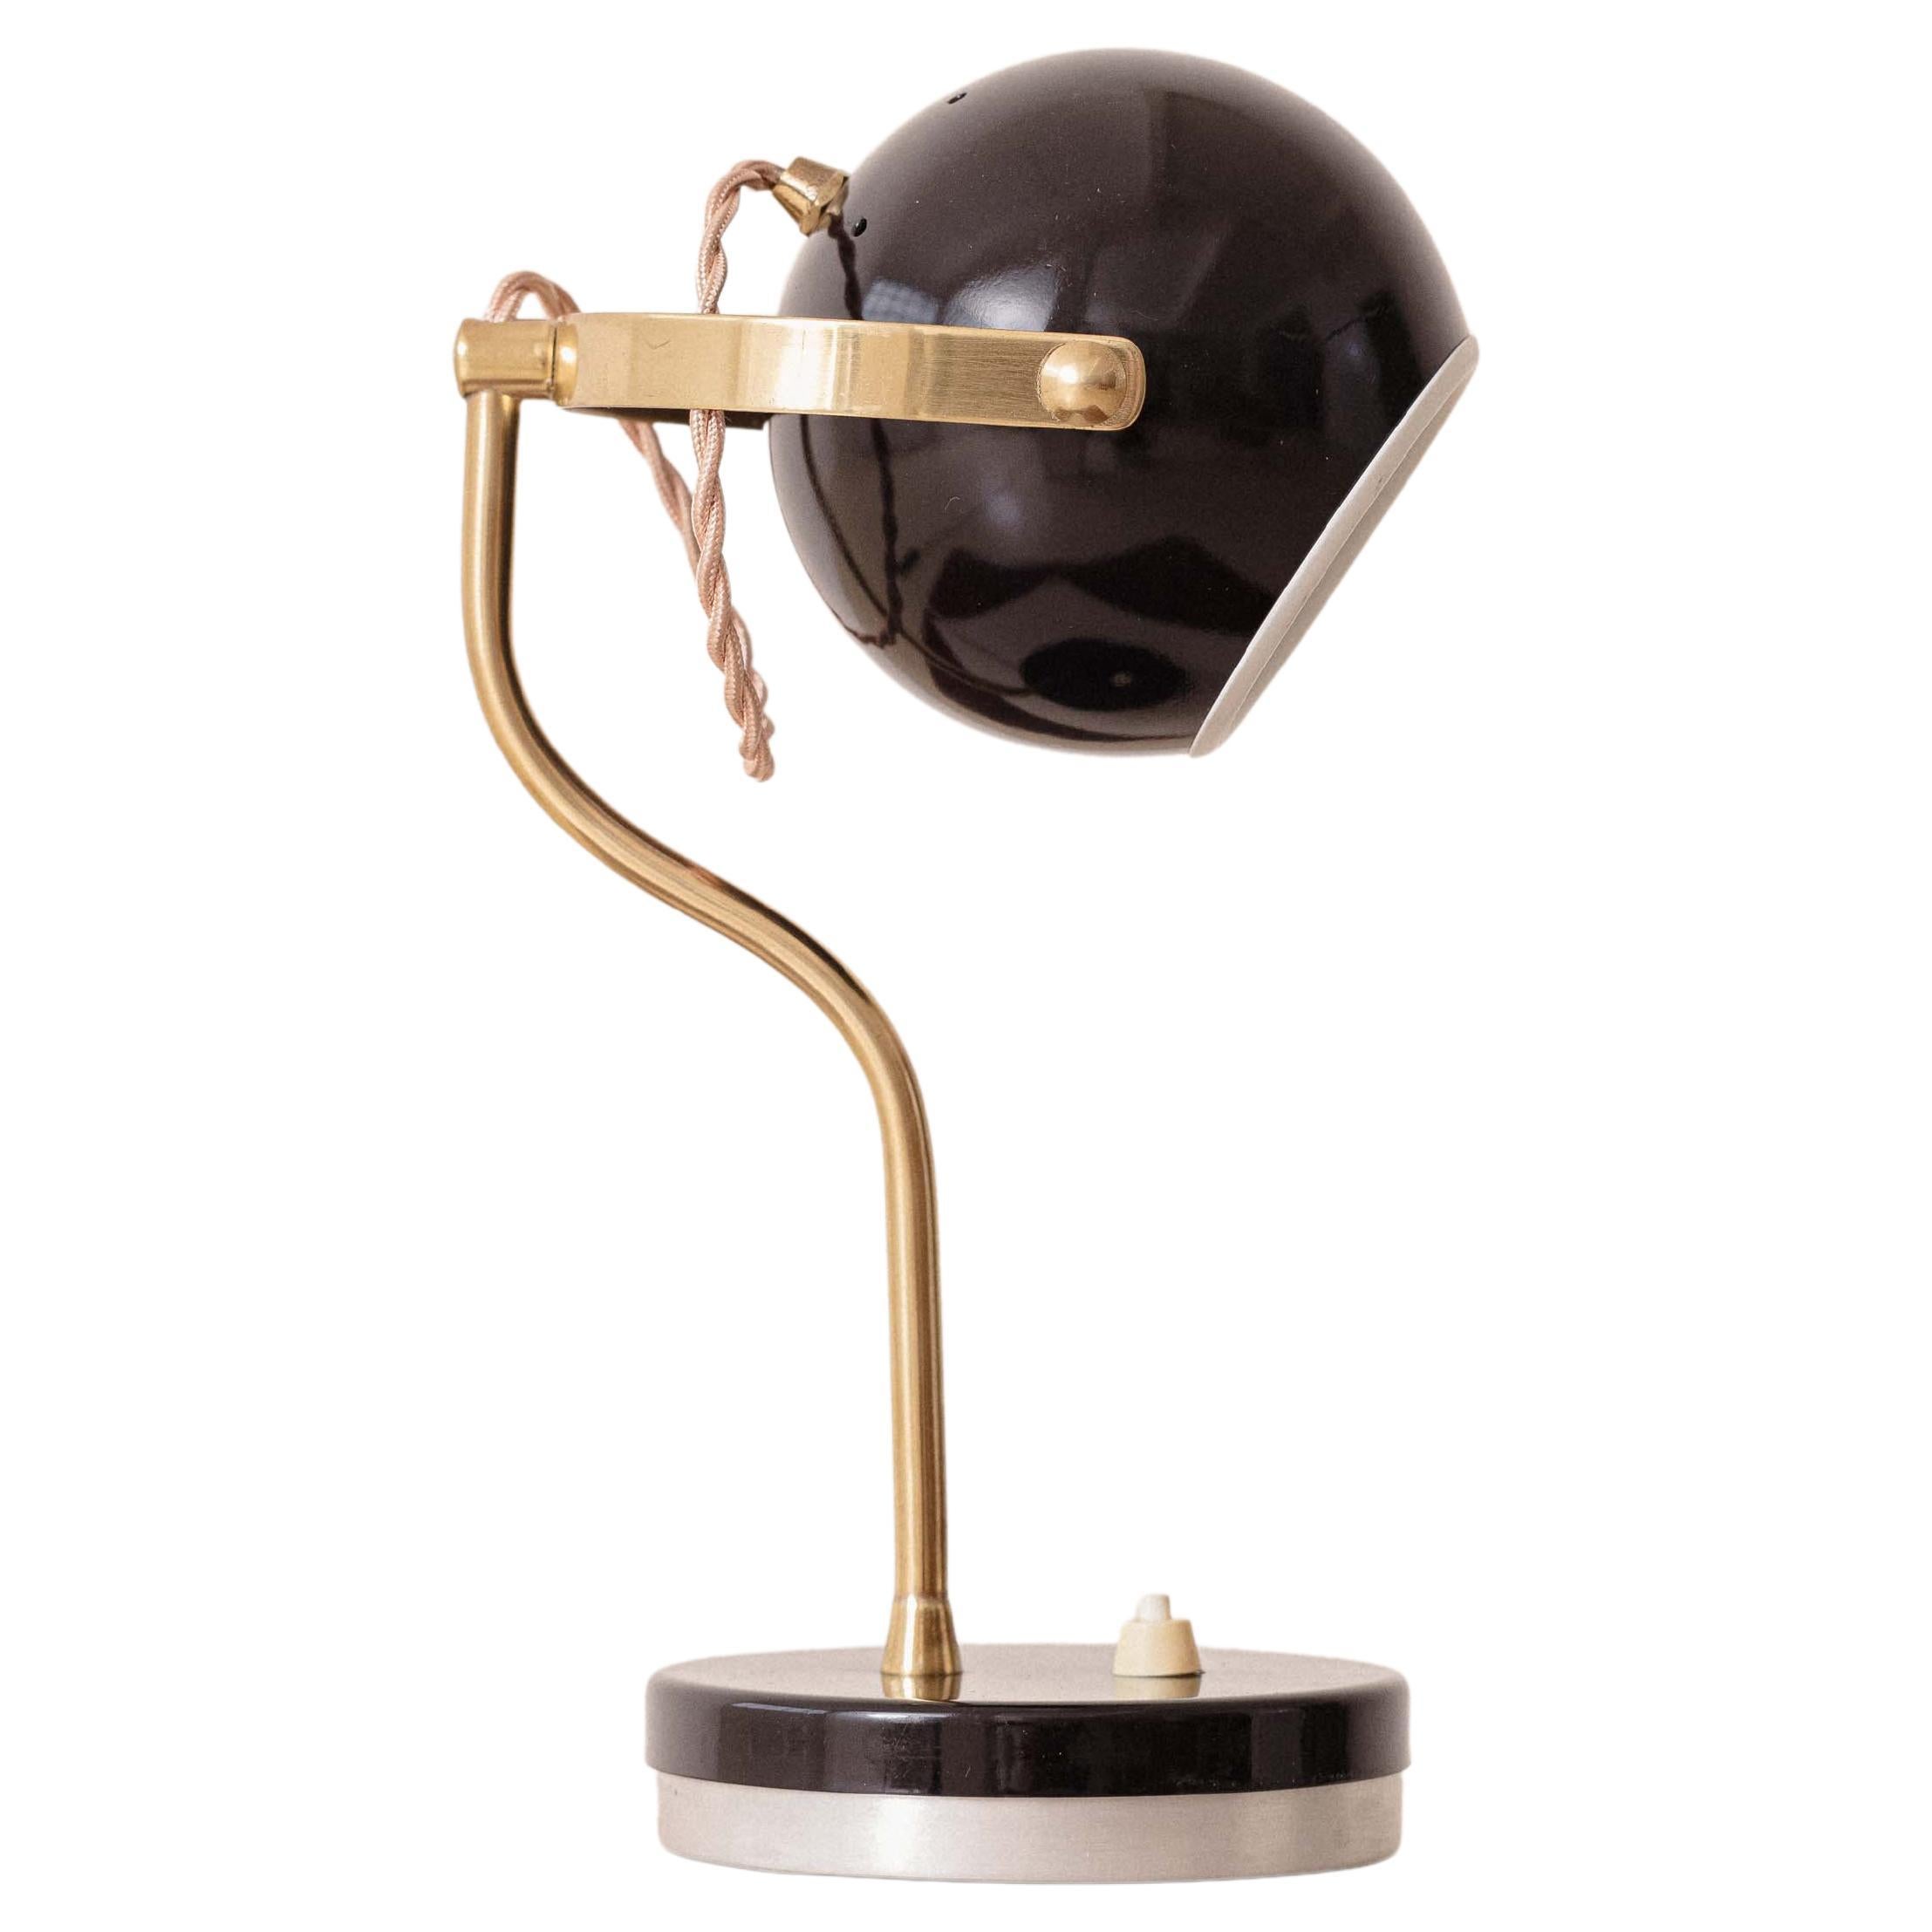 Midcentury Brazilian Table Lamp, by Enrico Furio, Produced by Dominici, 1950s For Sale